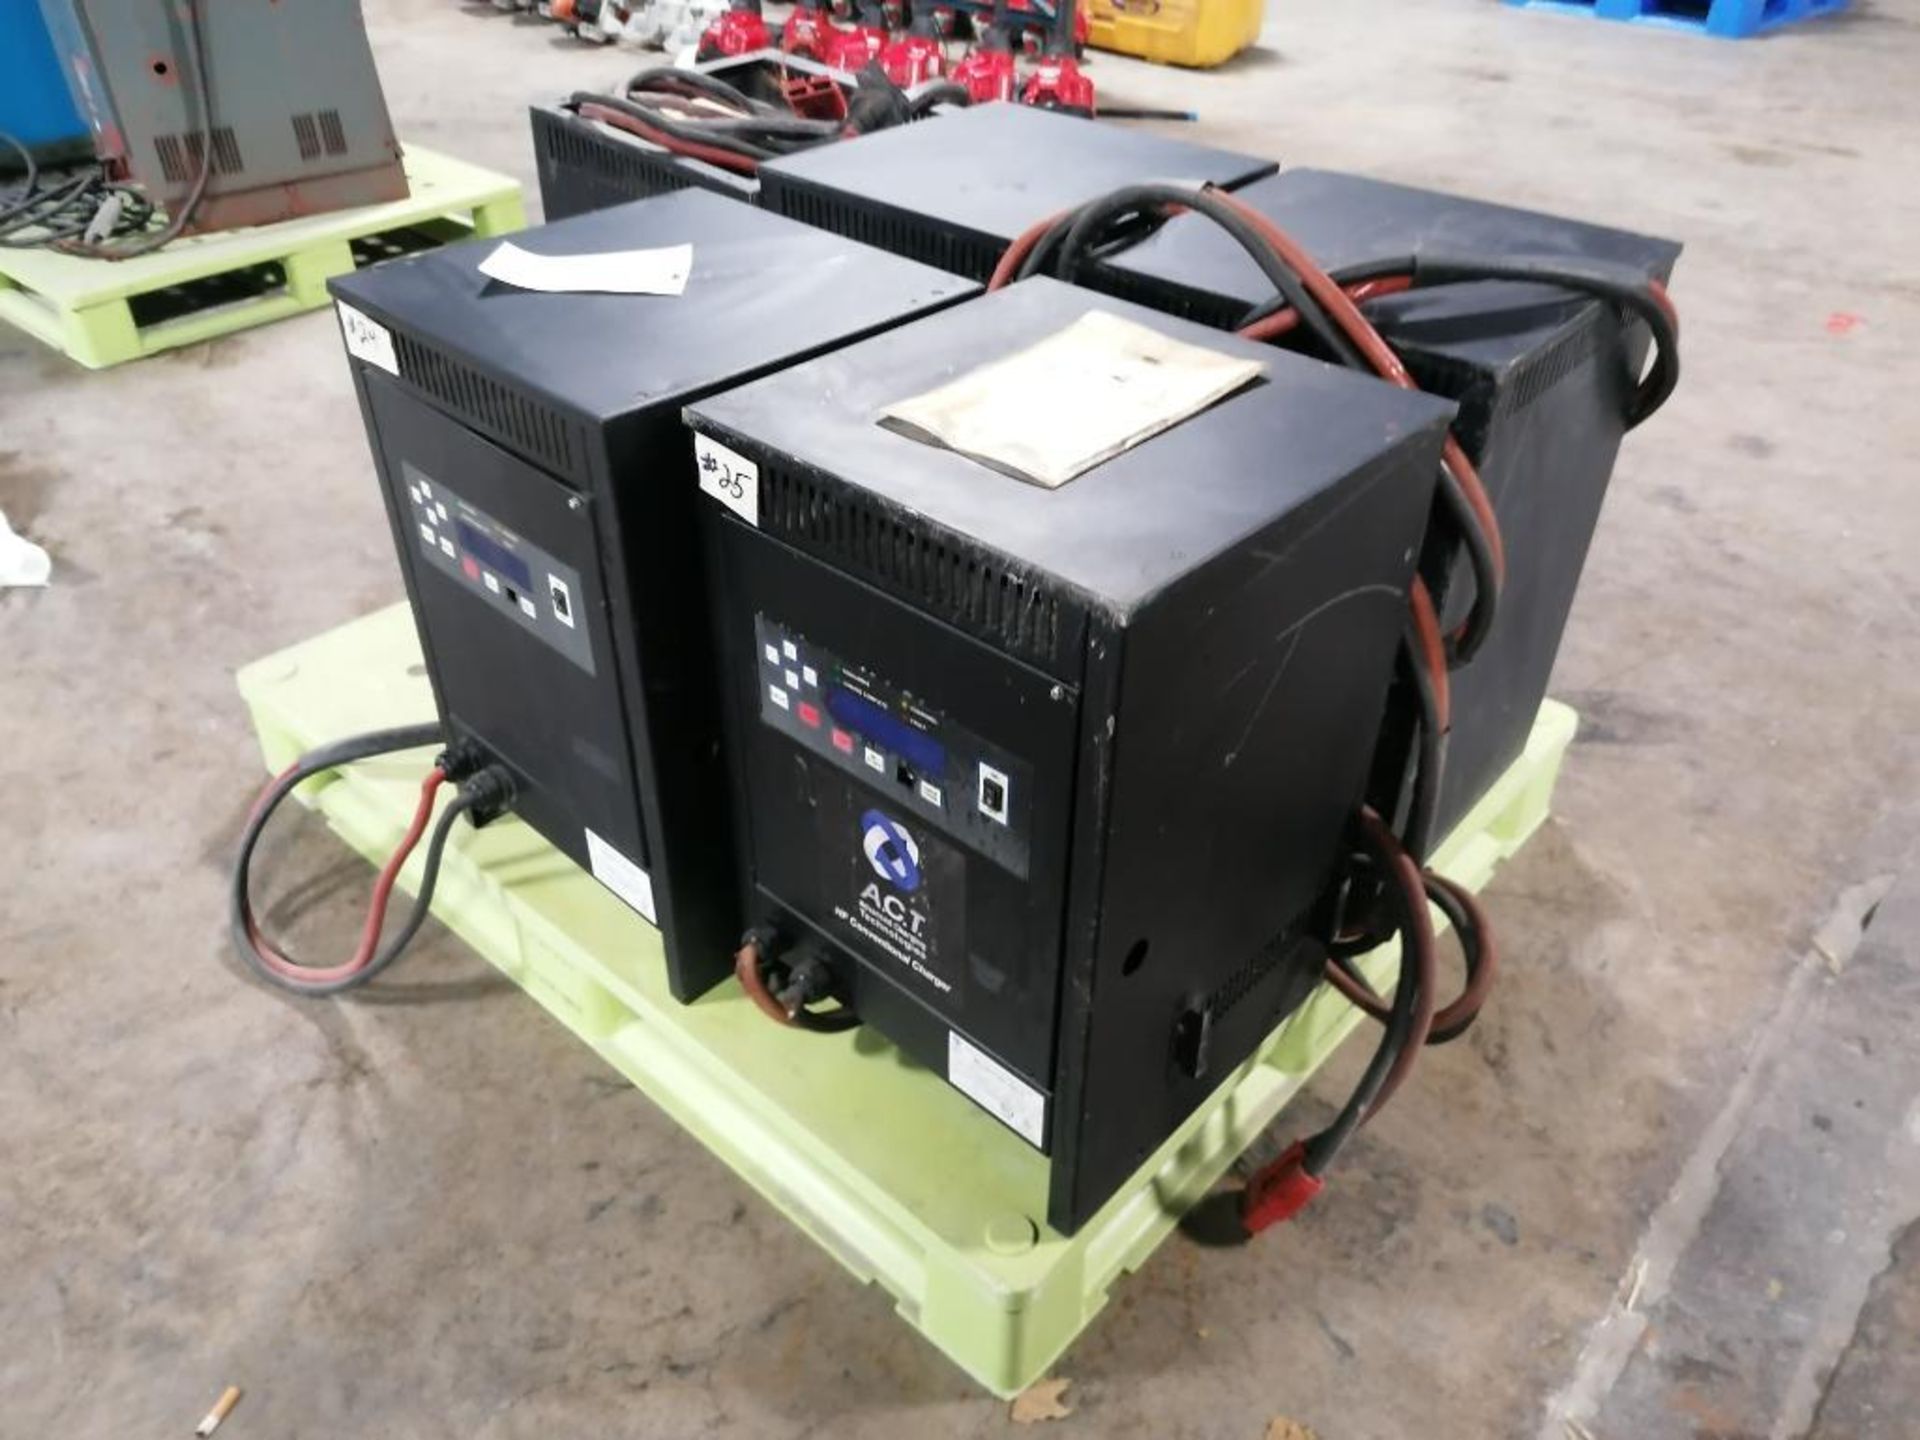 (2) A.C.T HF Conventional Charger, Model C24-750-T, Input 480 VAC, Output 24VDC & (3) A.C.T HF